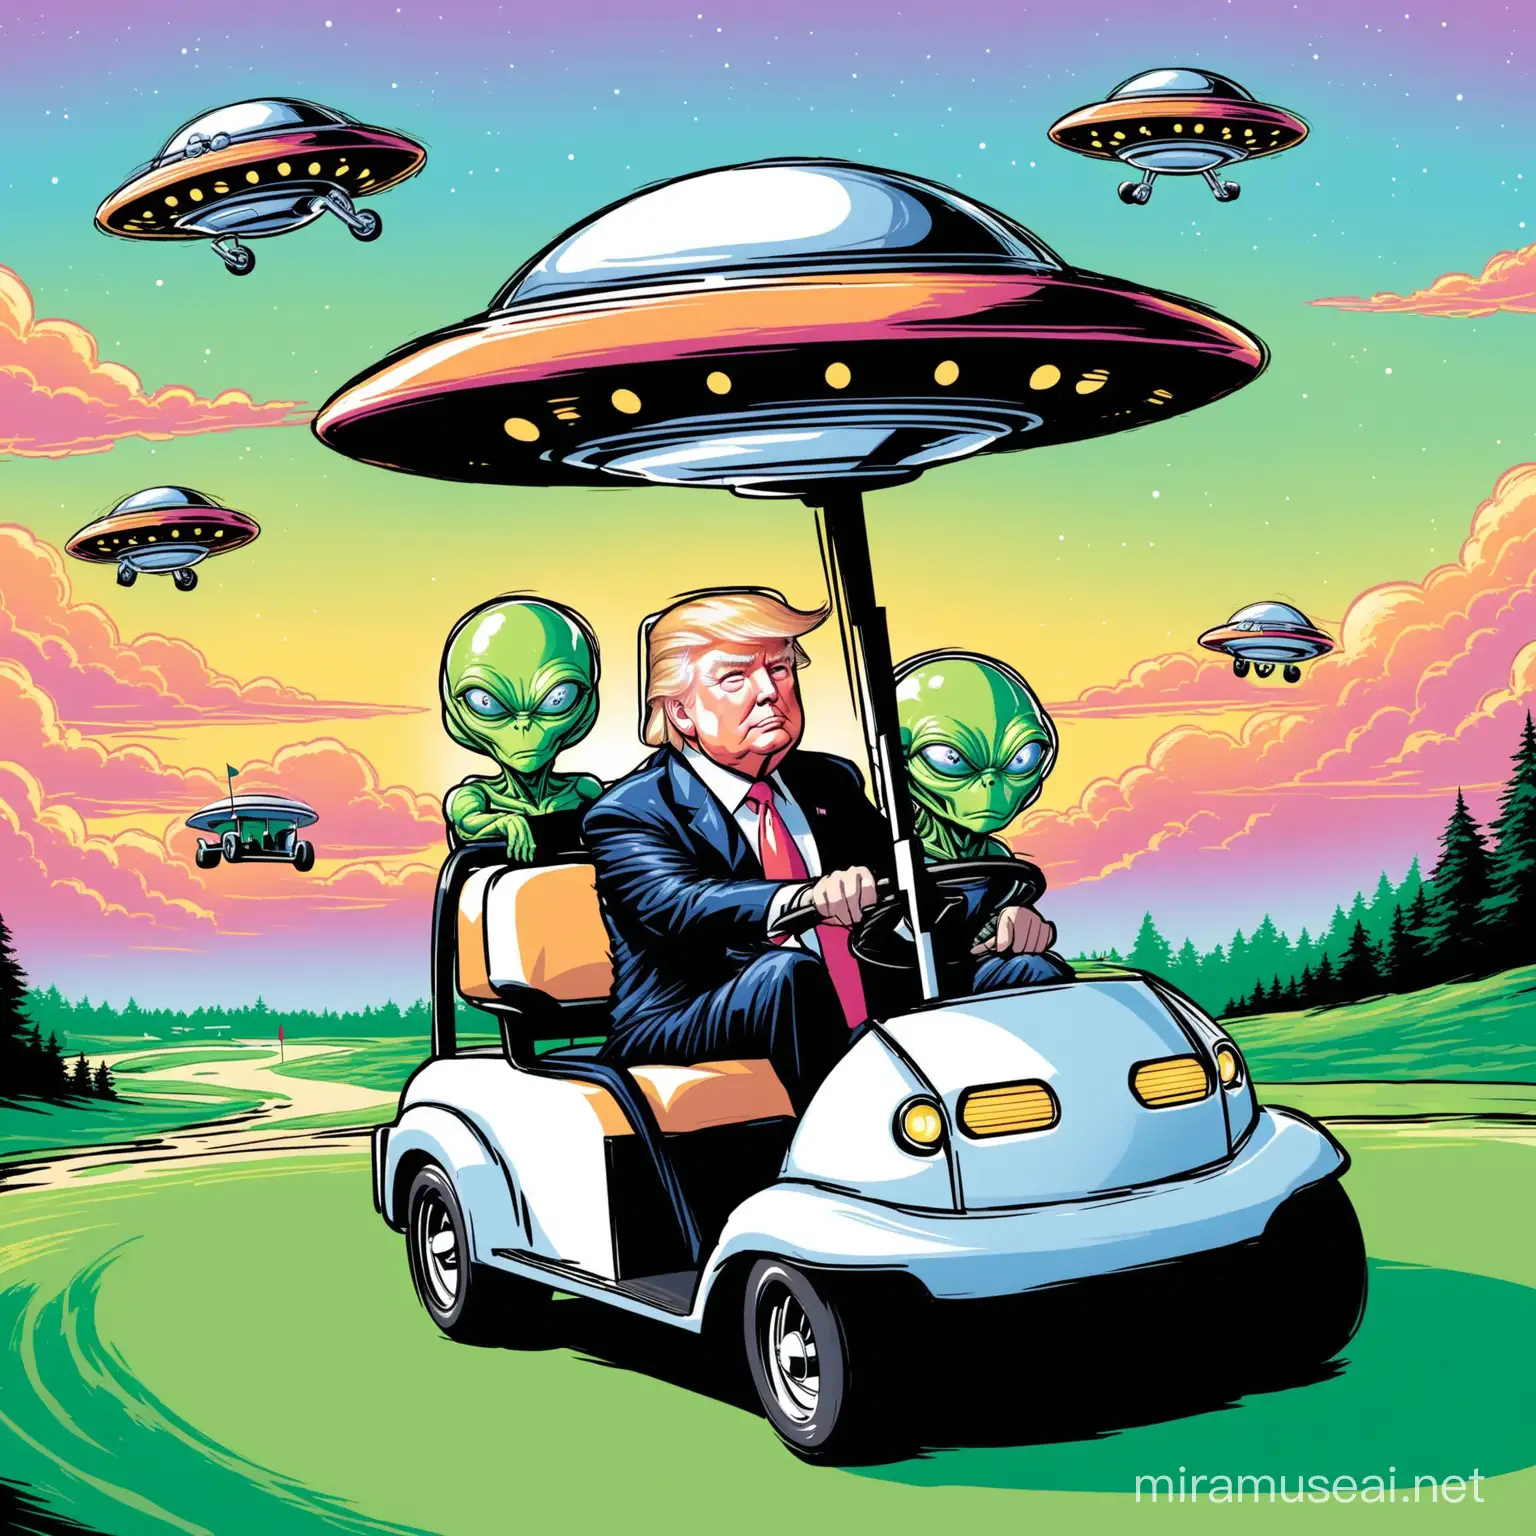 Donald Trump driving a golf cart shaped like a UFO, with aliens as his golfing buddies. 